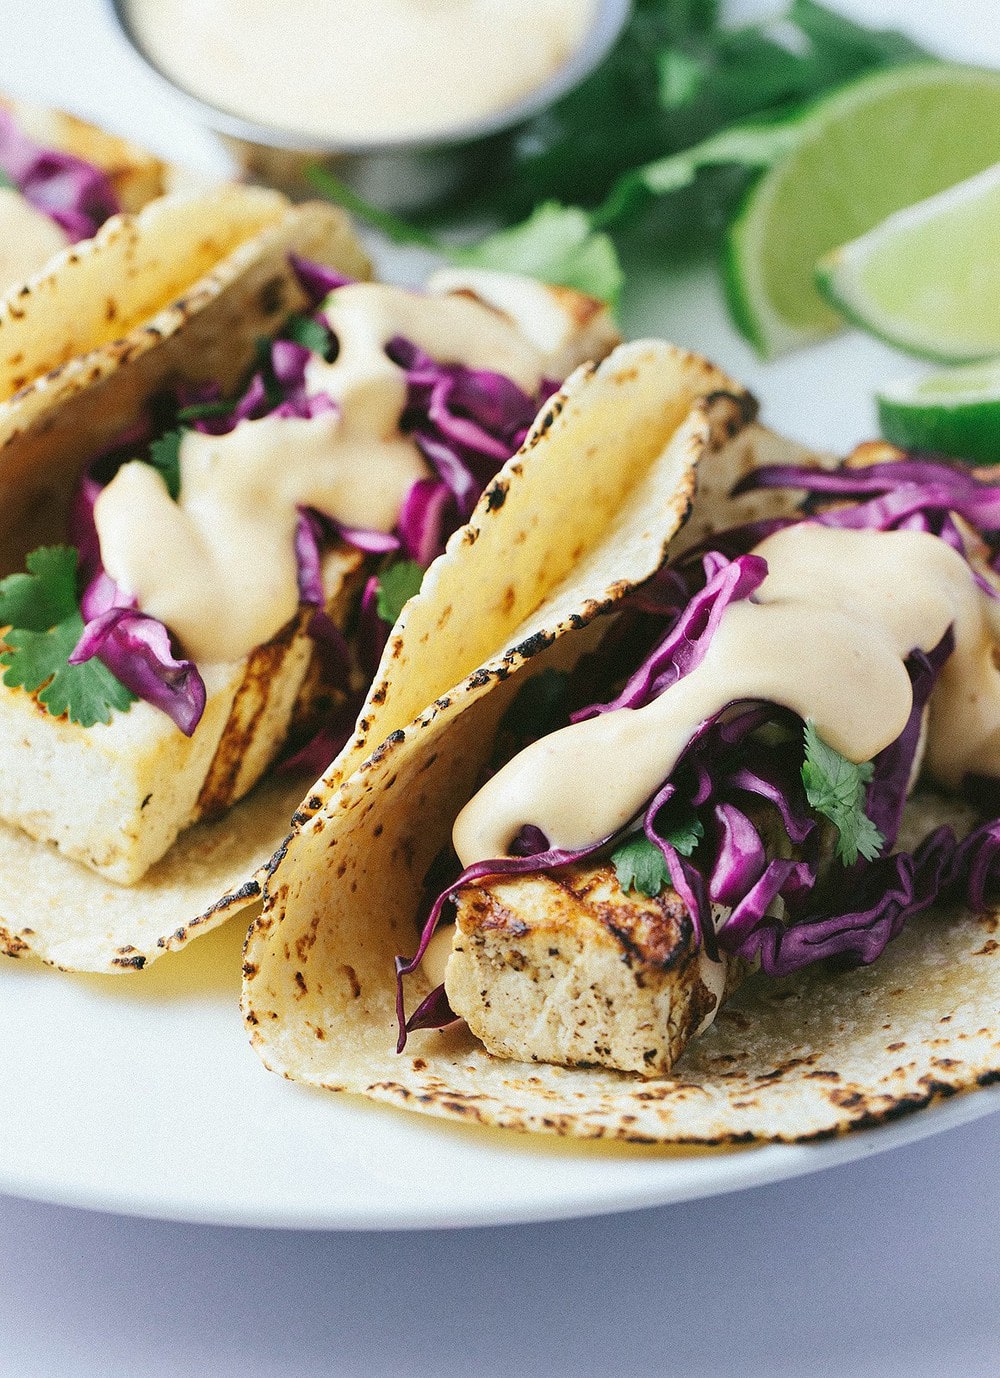 side angle view of grilled tofu taco piled high with red cabbage slaw and spicy sauce